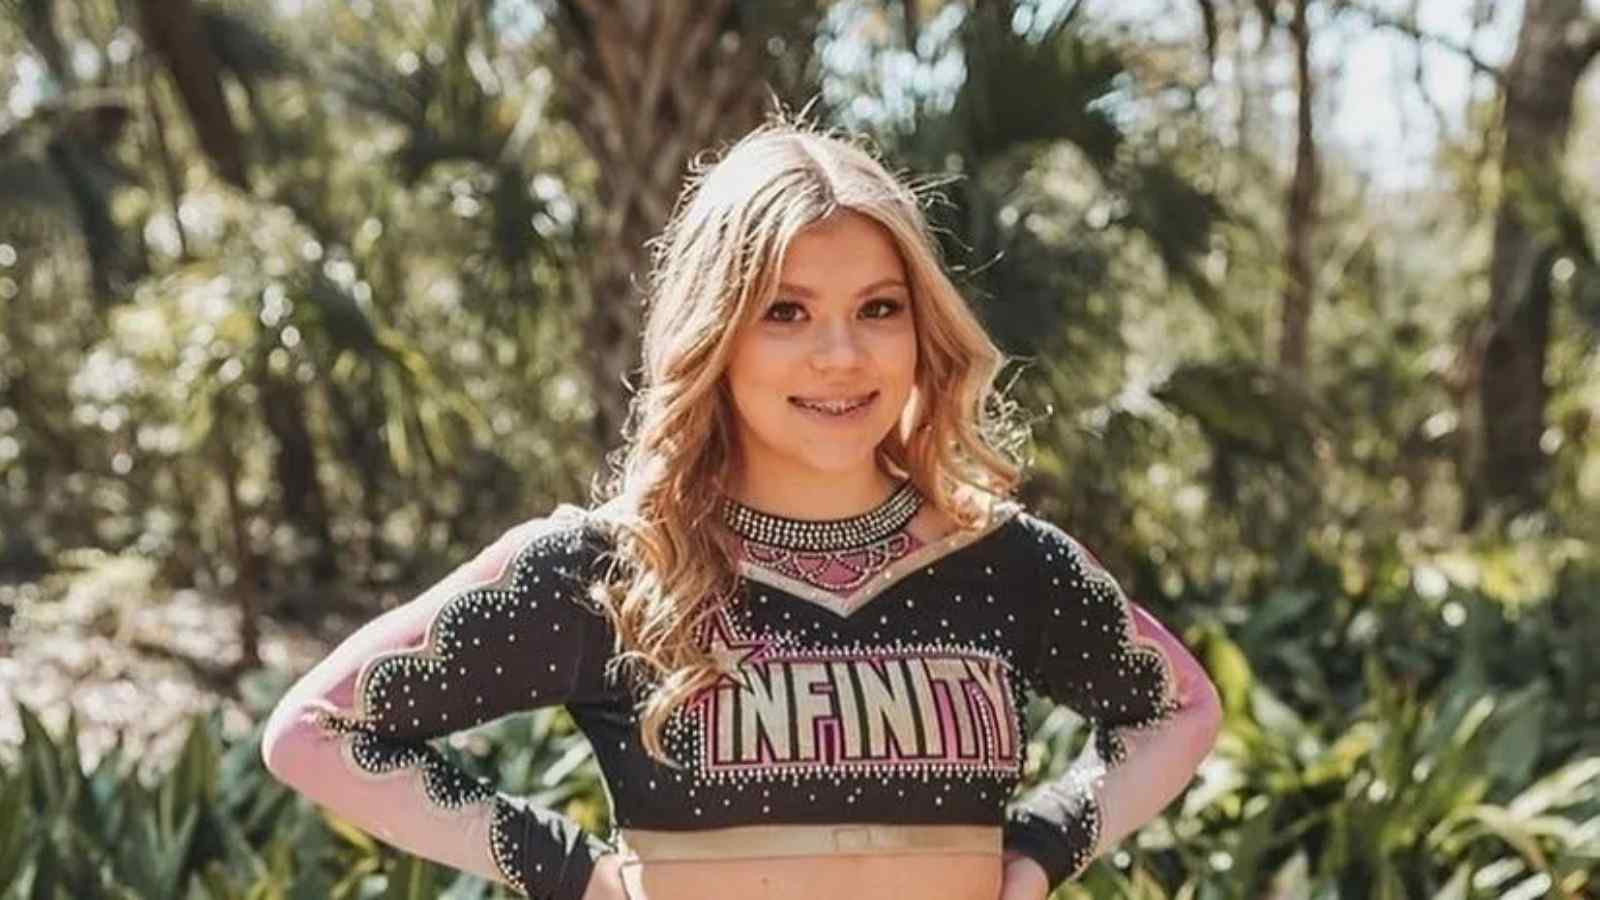 Tristyn Bailey Cause of Death, Autopsy Report